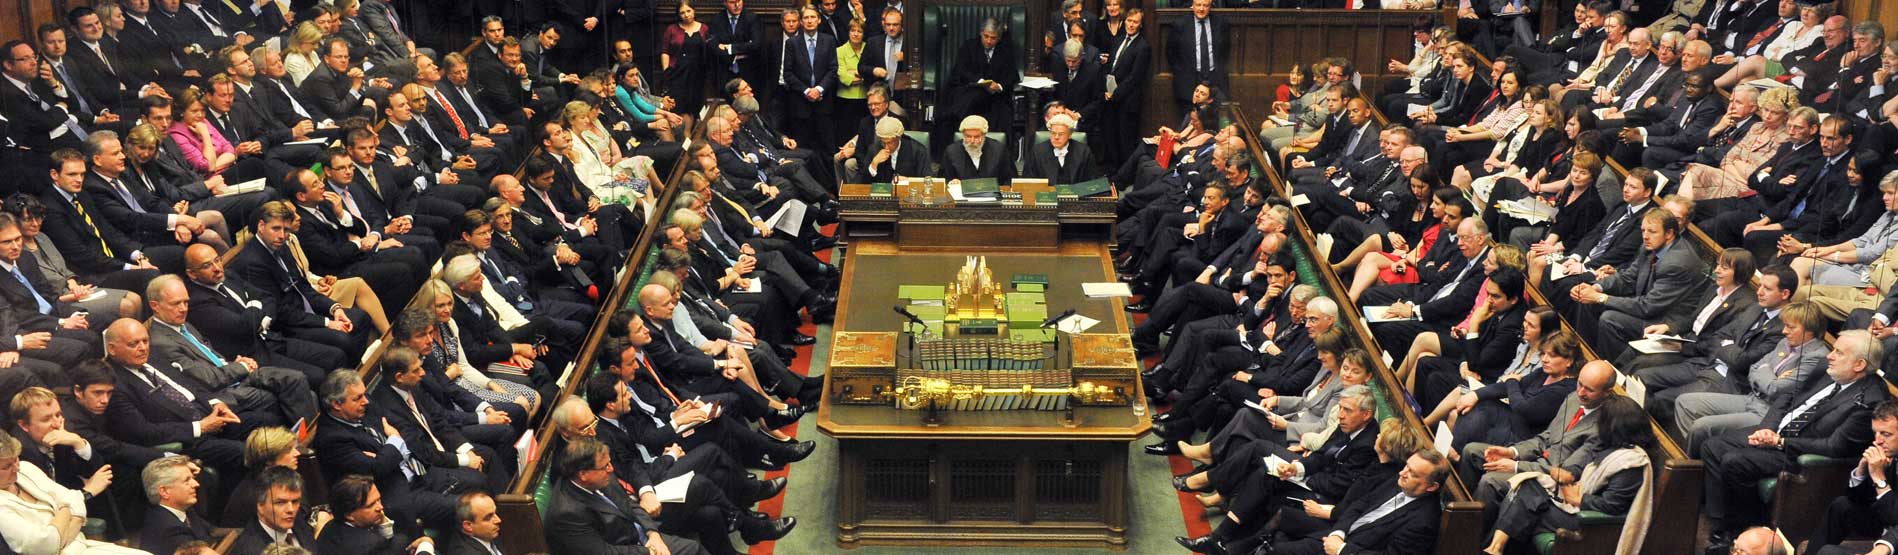 Image of House of Commons